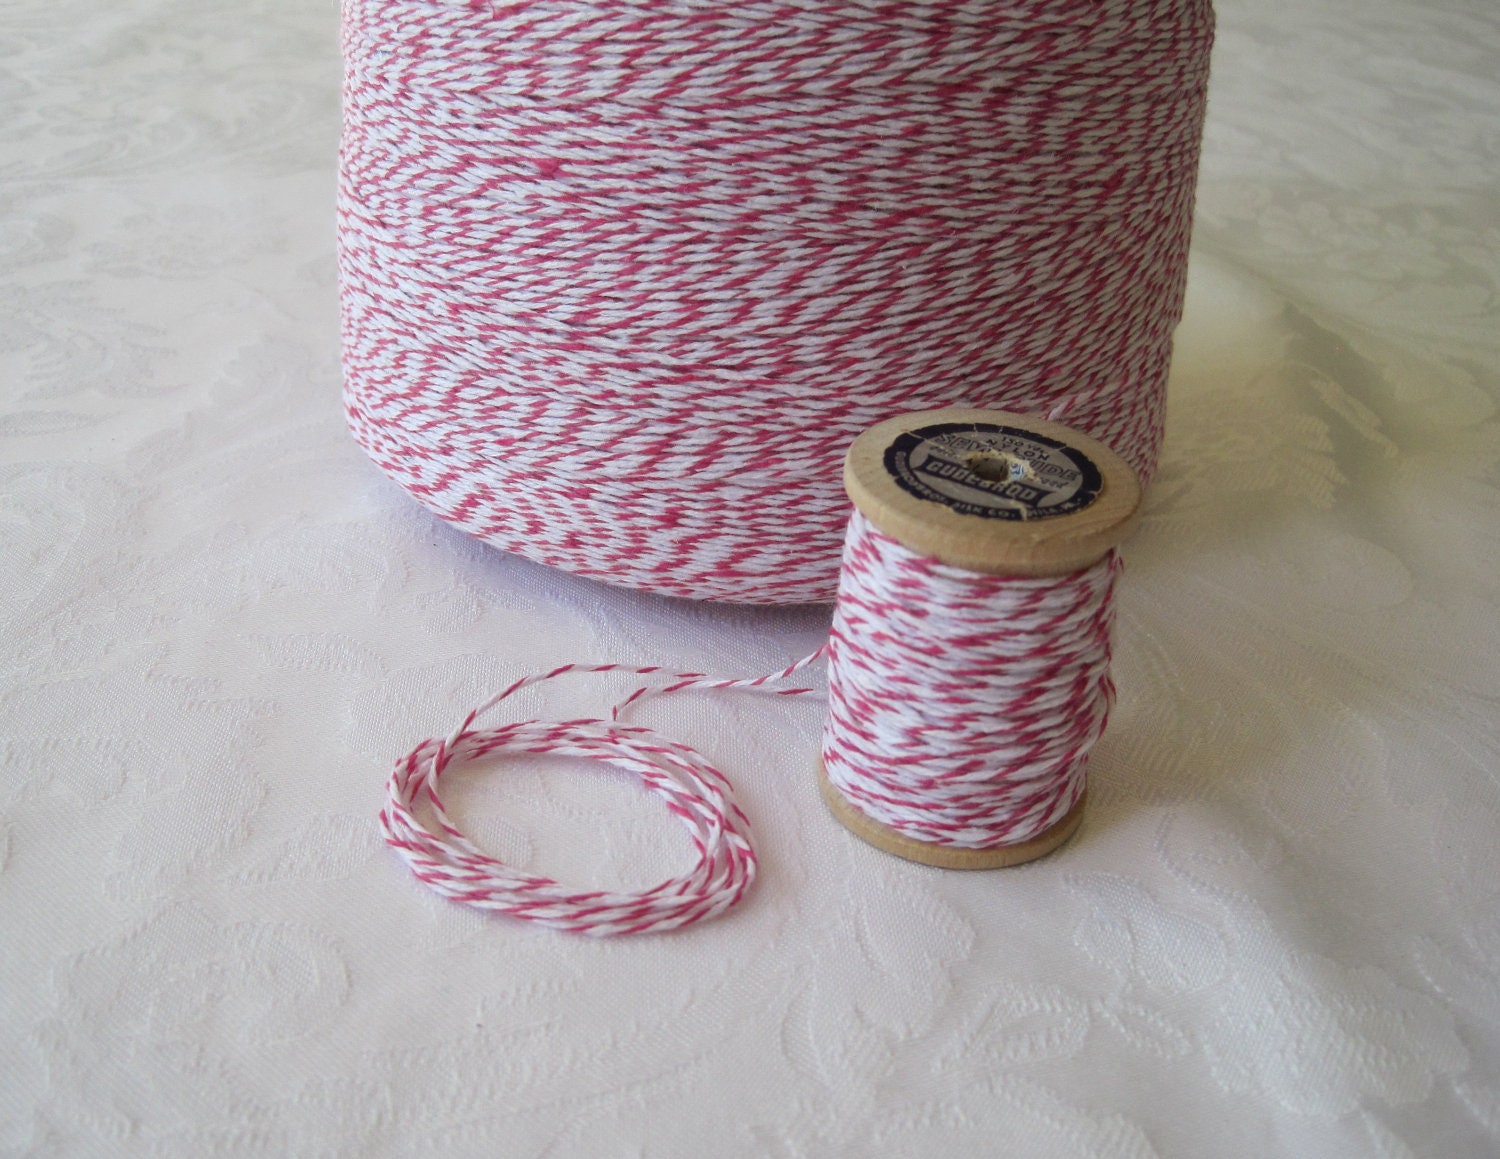 Wrapables Cotton Baker's Twine 12ply 100 Yard Pink